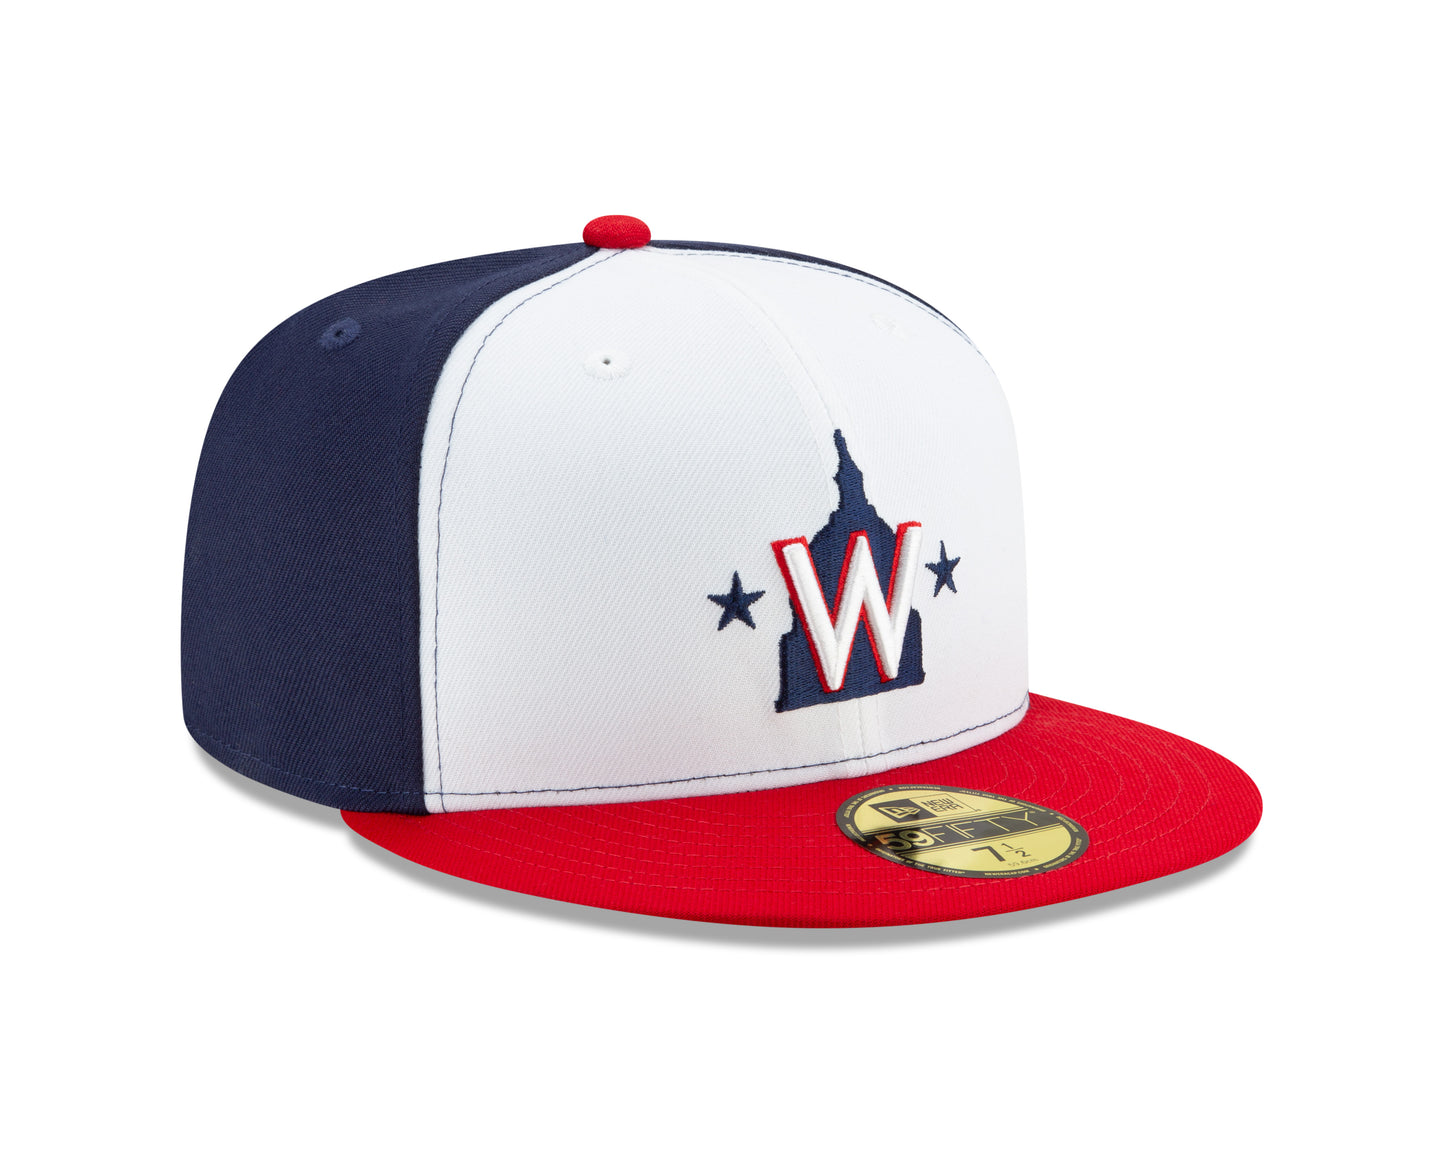 Washington Nationals New Era Authentic Collection Performance 59FIFTY Hat